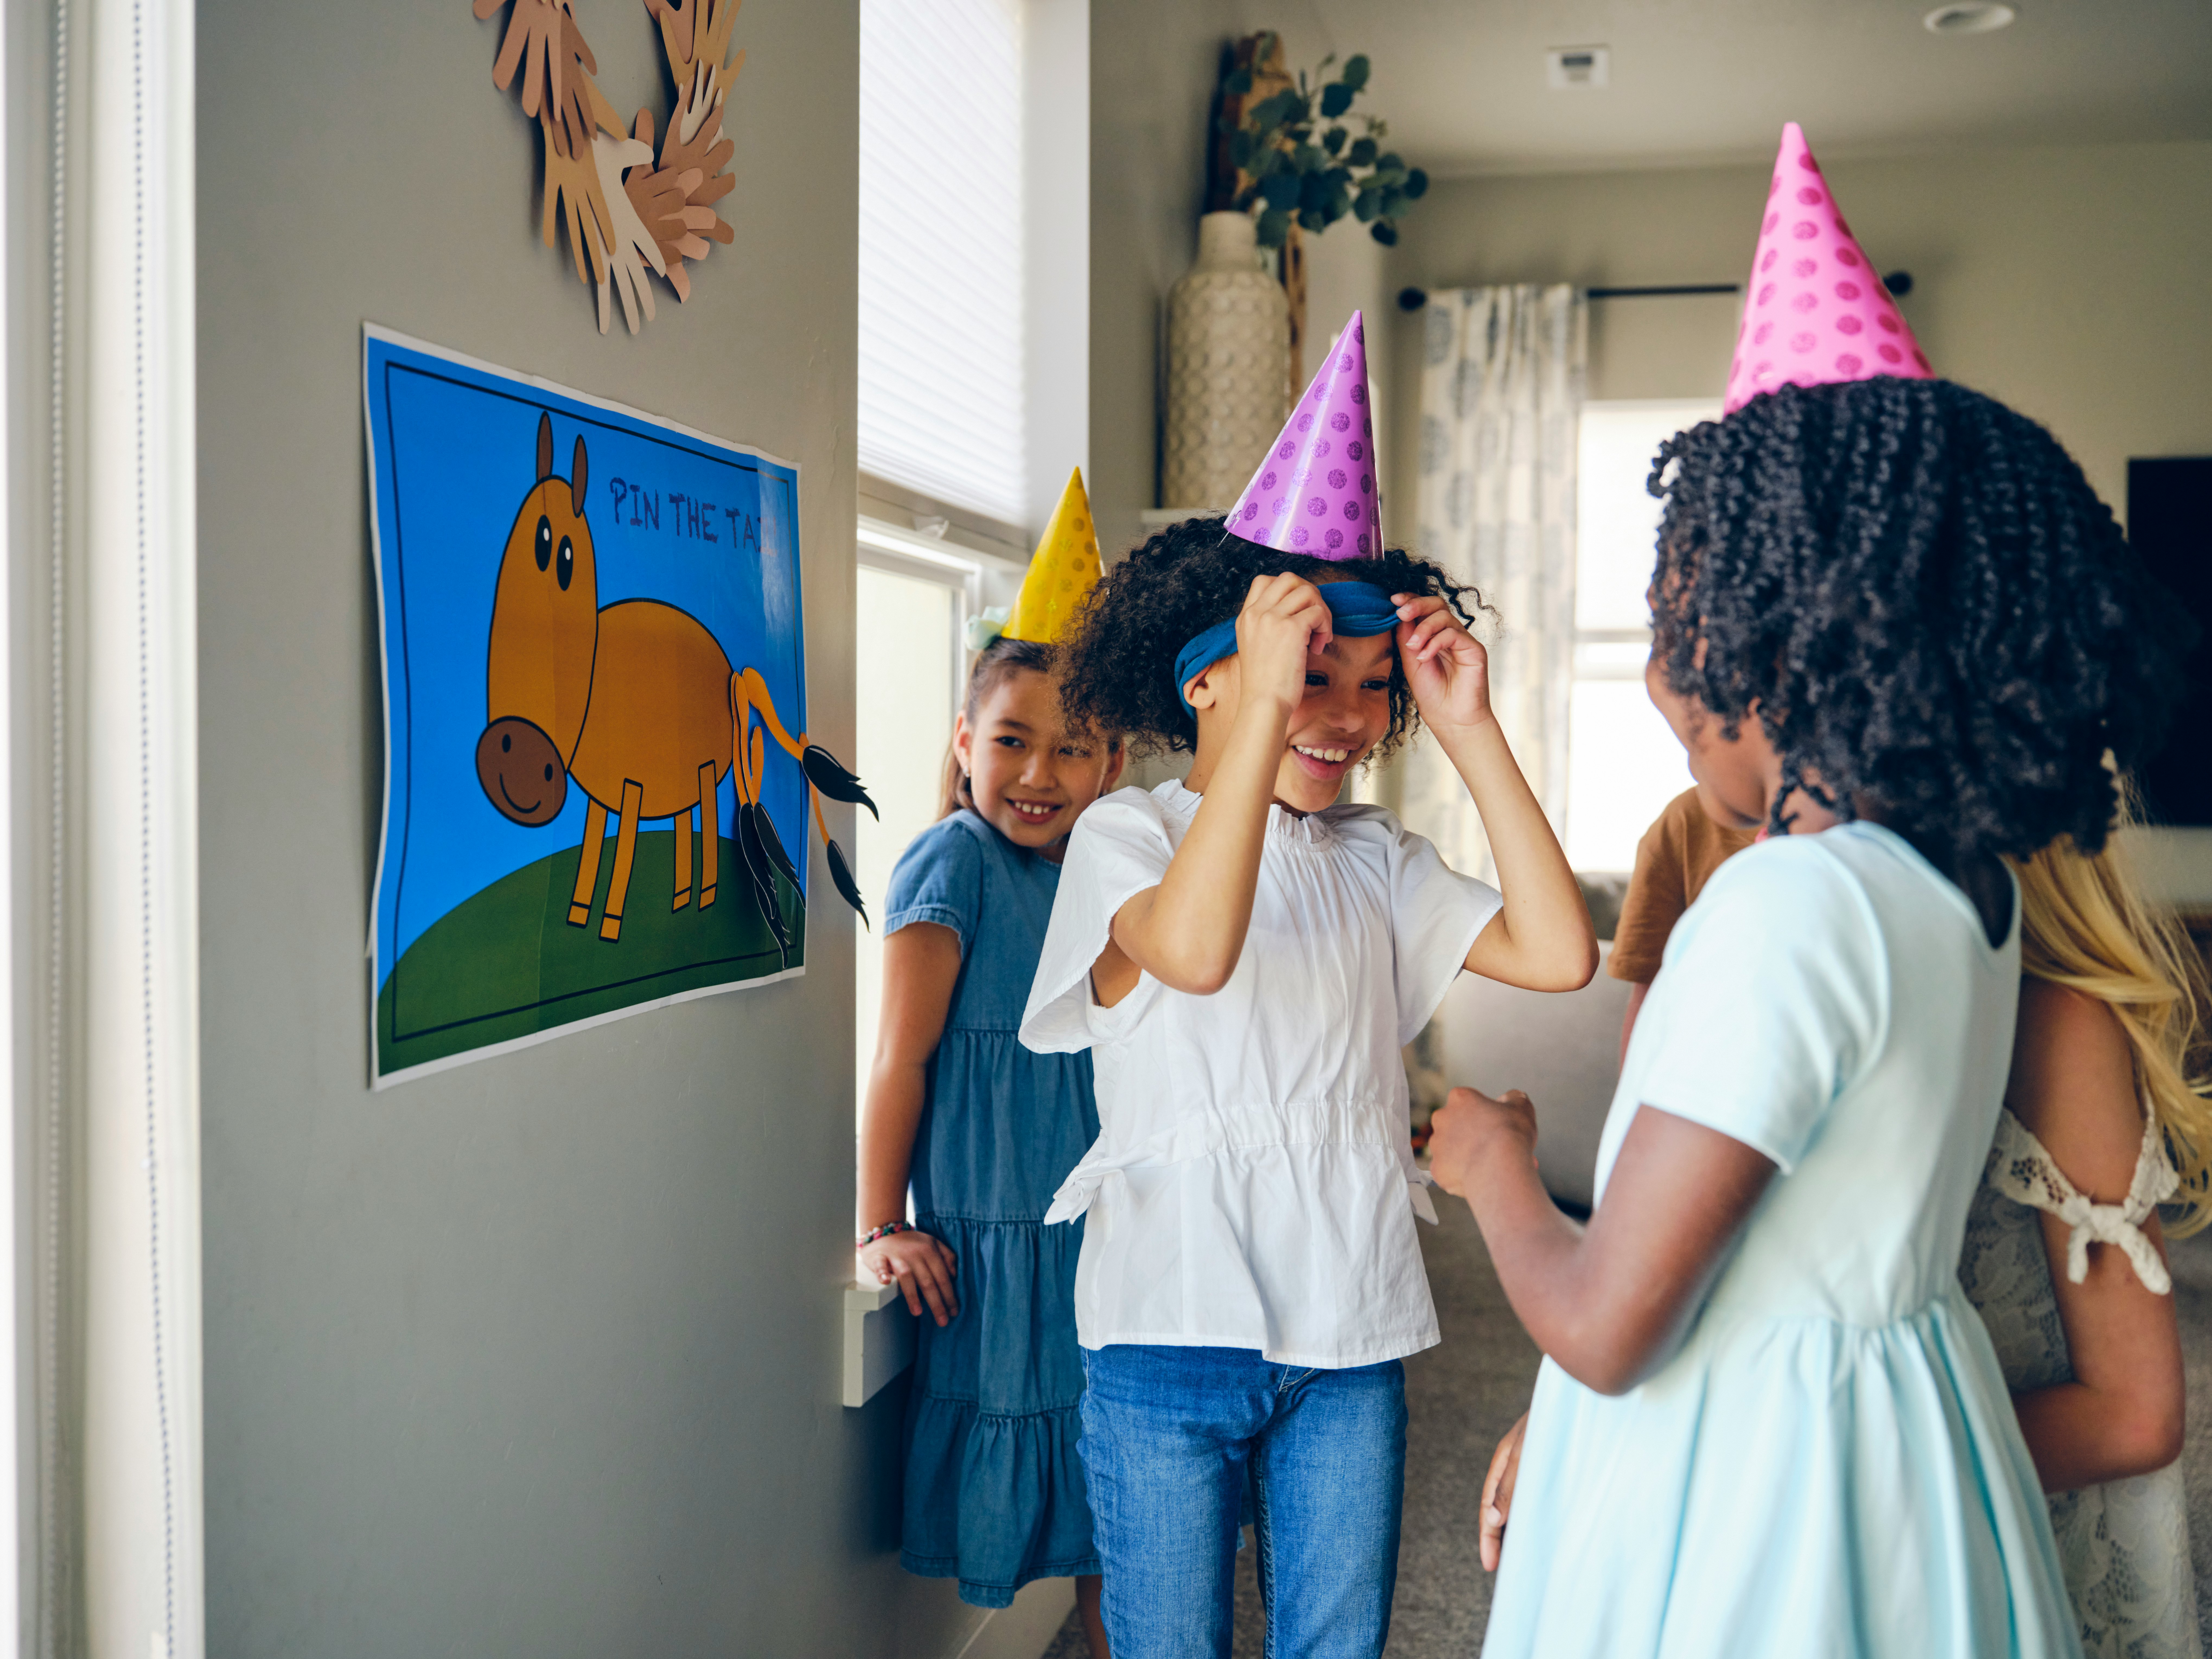 15 Truly Original Ideas for the 6-Year-Old Birthday Party